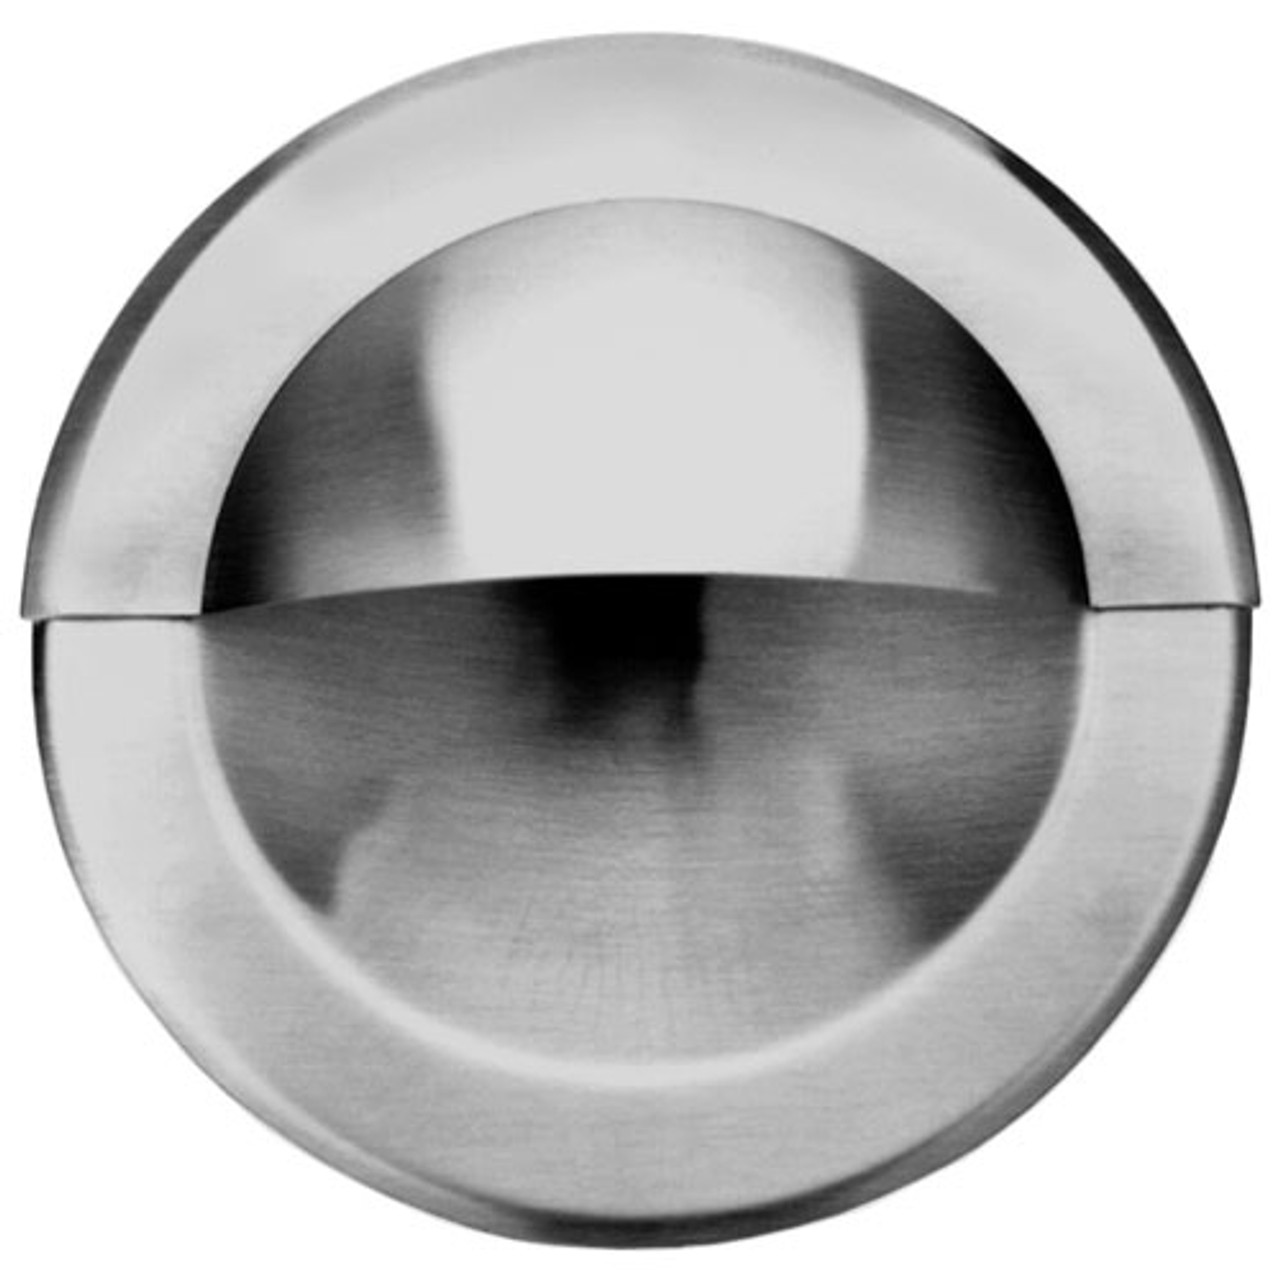 Pull, Round S/S, 4-3/4" Dia - Replacement Part For Standard Keil 1260-1010-1283